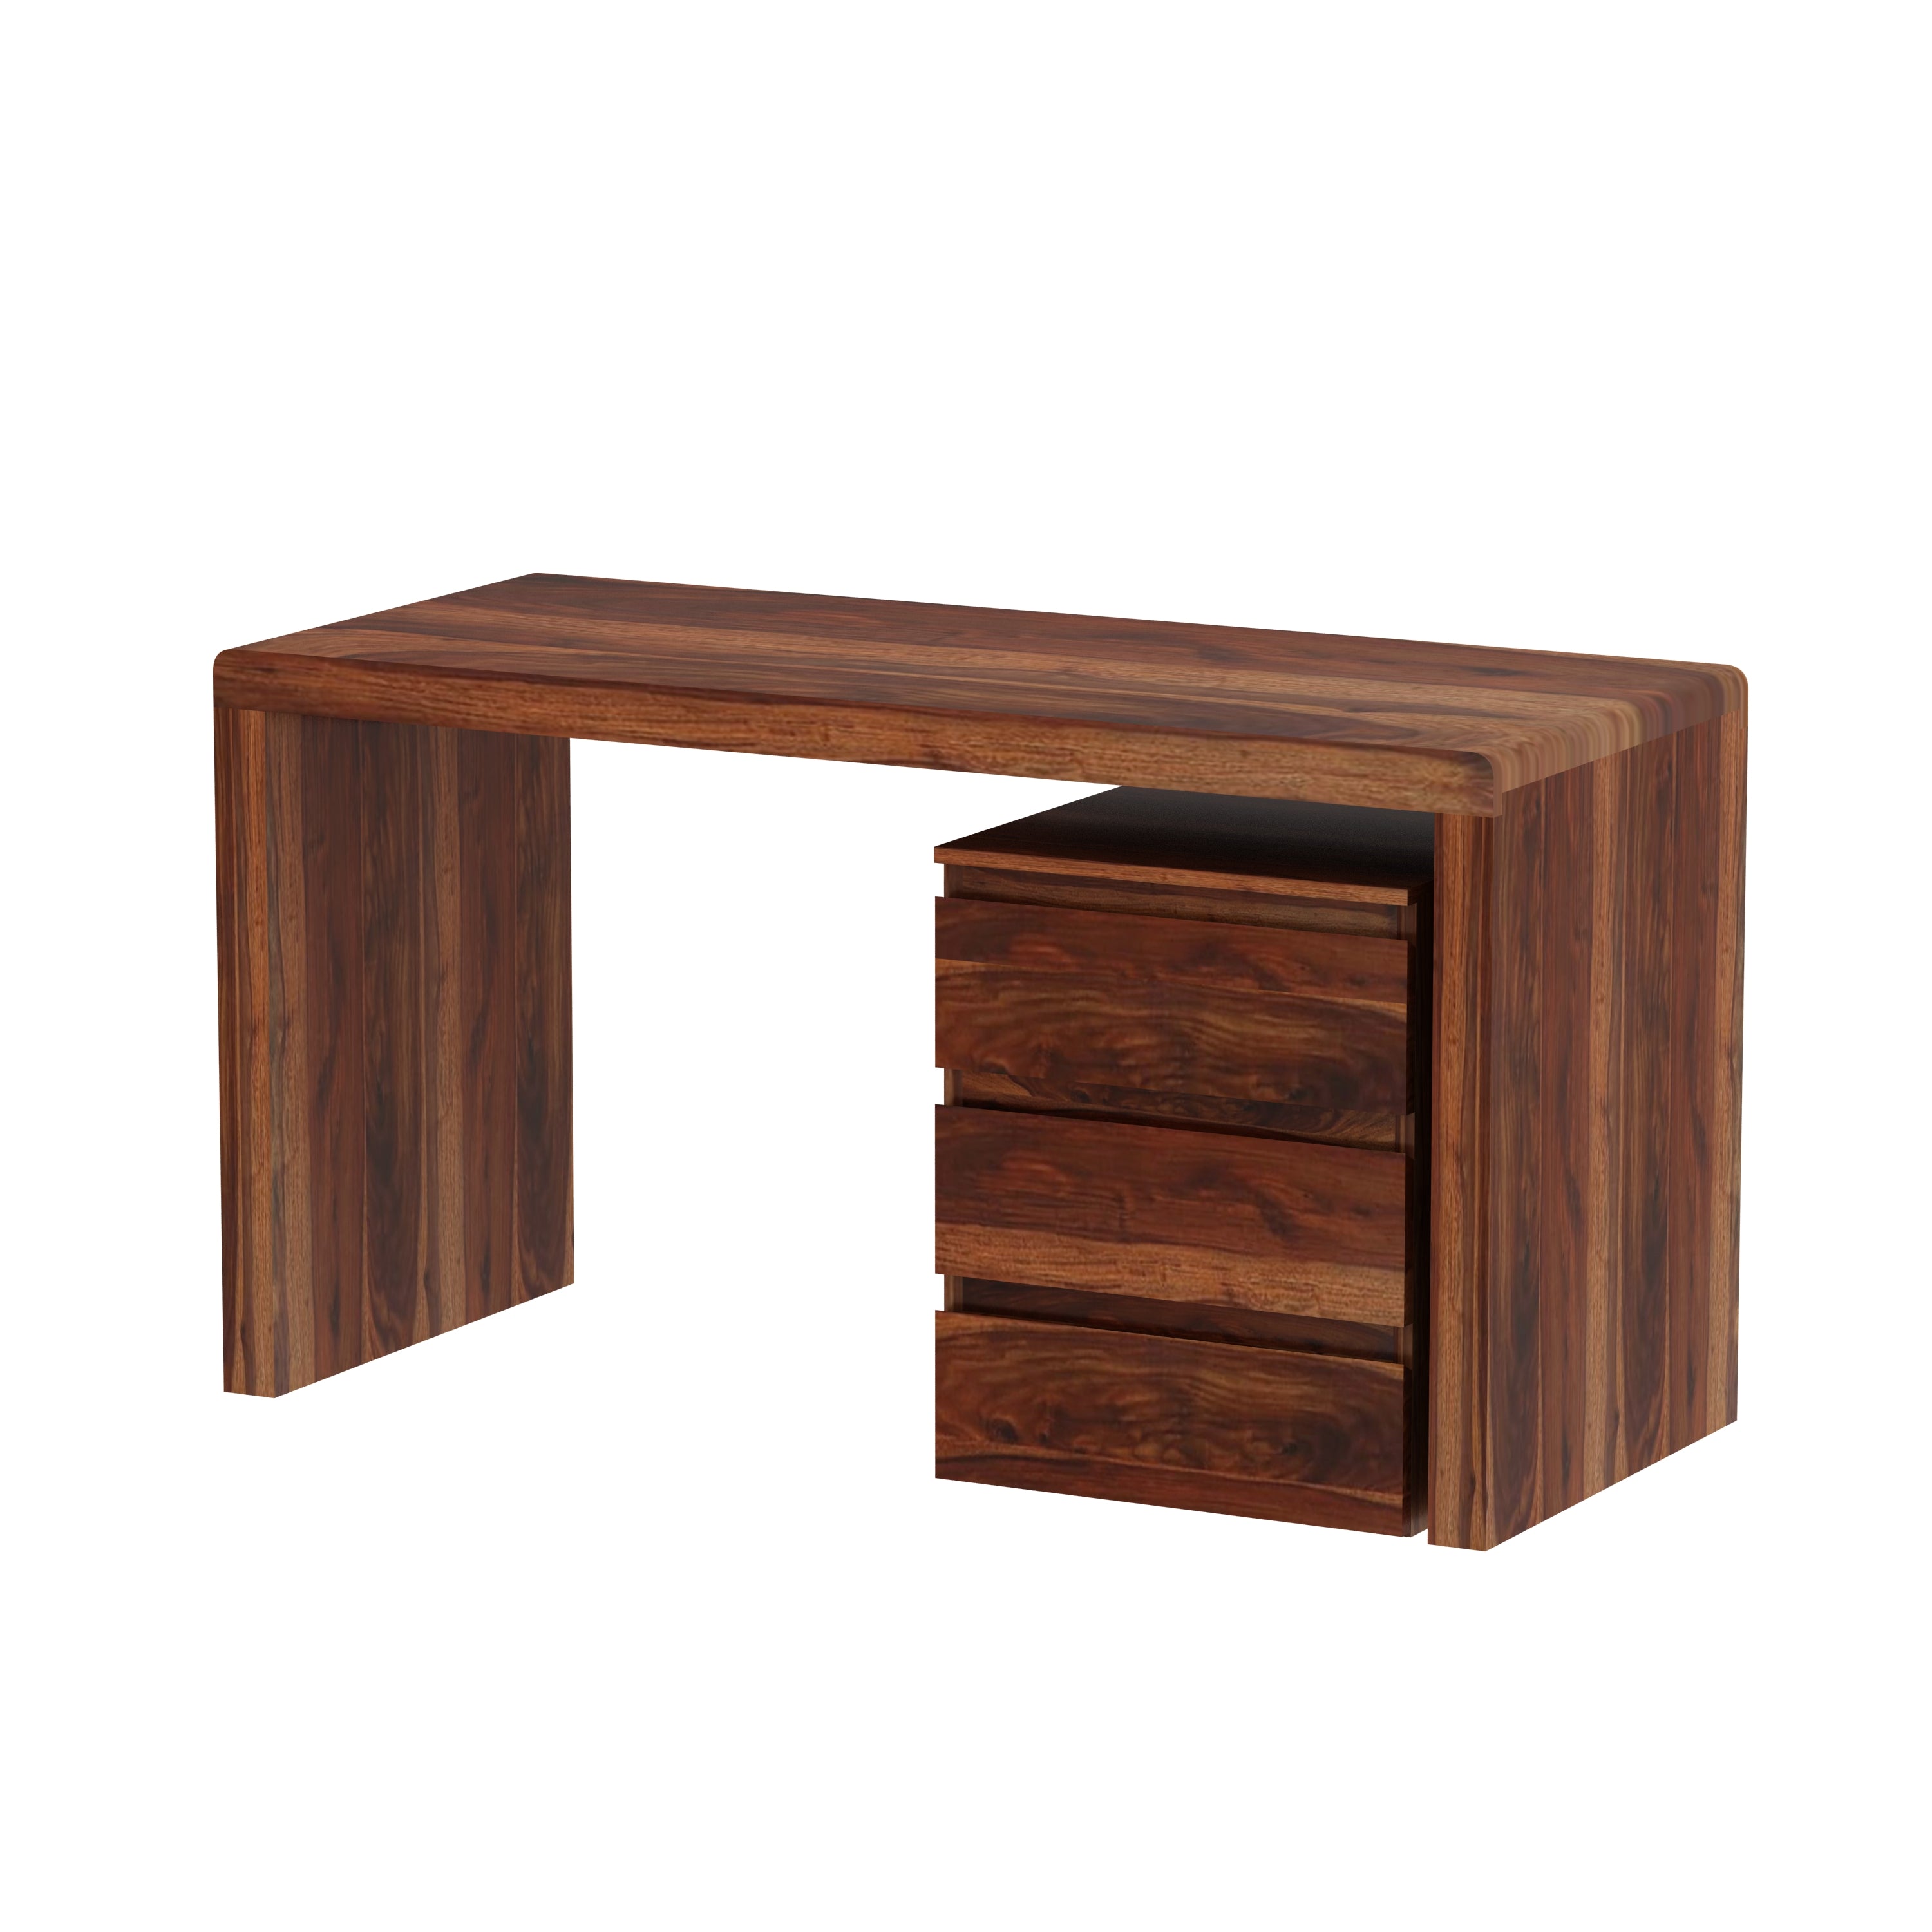 Denzaderb Solid Sheesham Wood Study Table With Movable Chest of Drawers (Natural Finish)